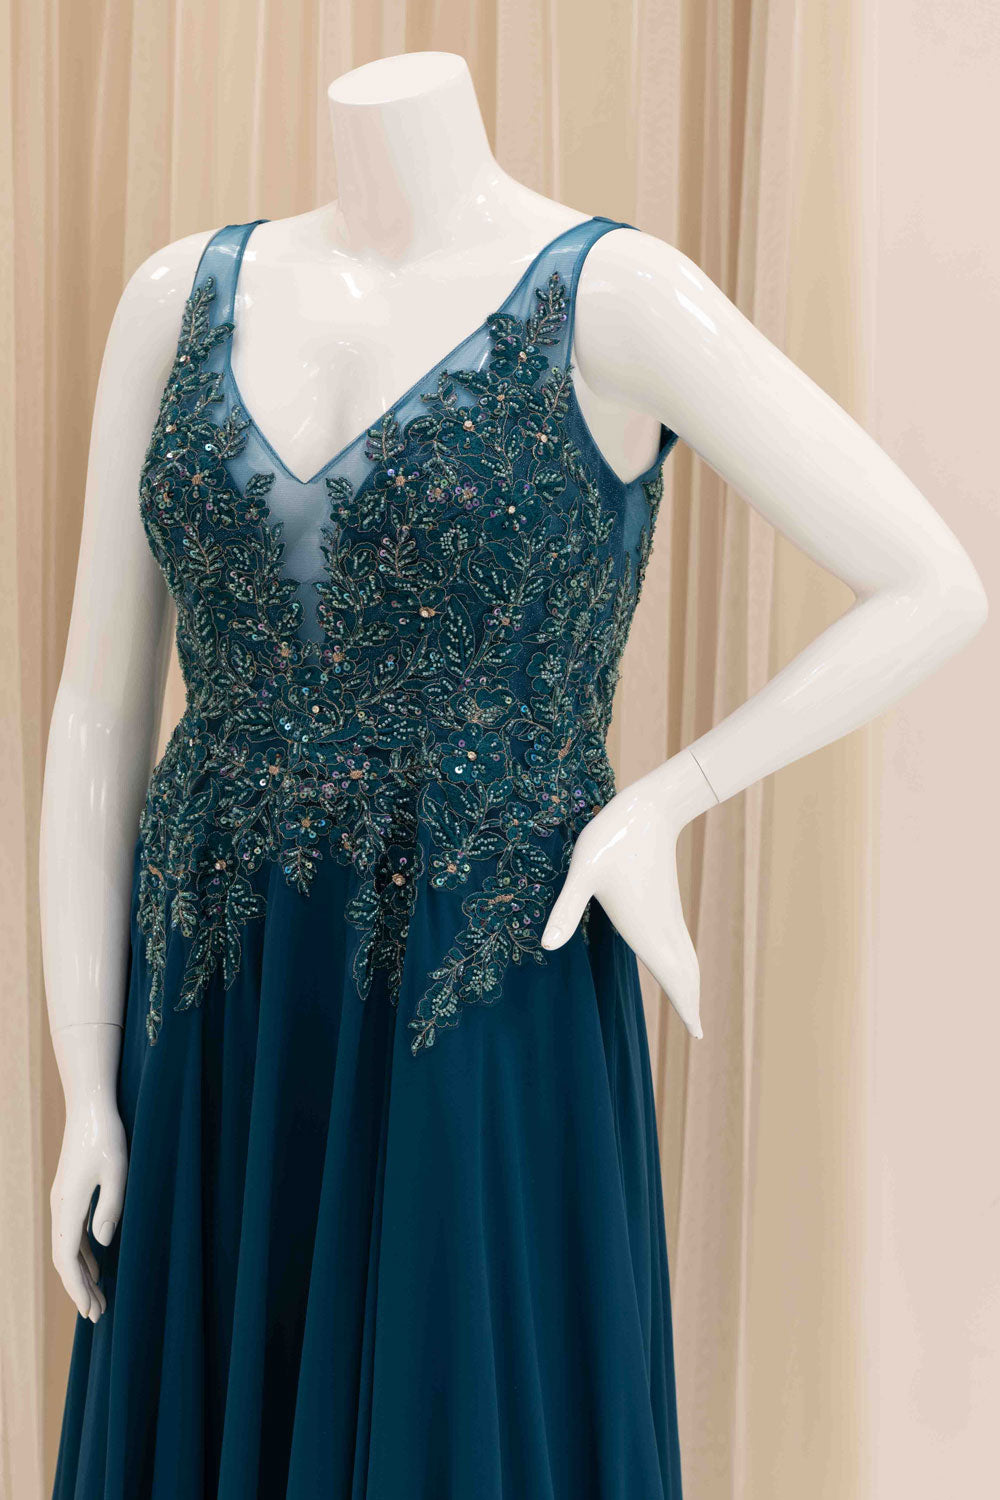 Teal Dress for Maid of Honor